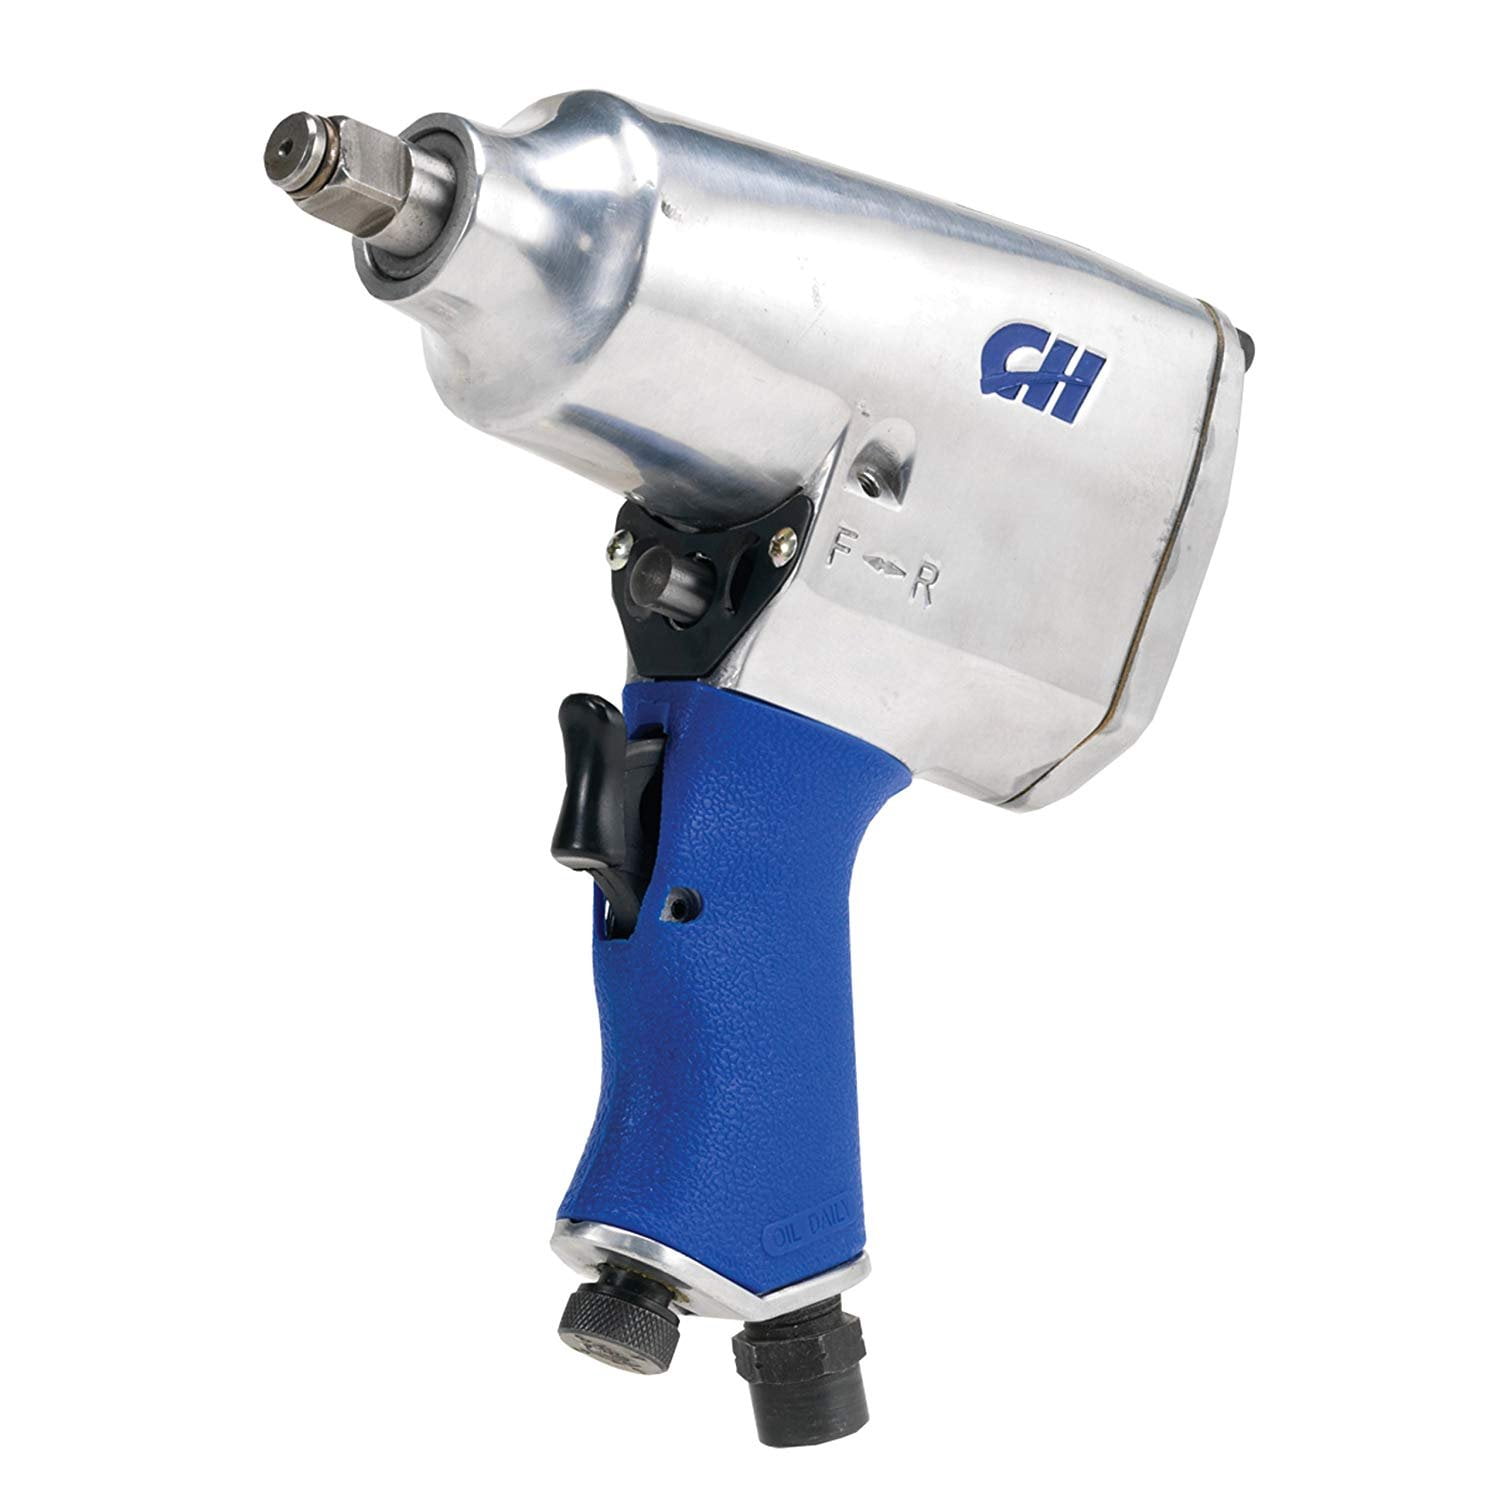 Campbell Hausfeld TL1017 3/8" Butterfly Impact Wrench With Regulator for sale online 